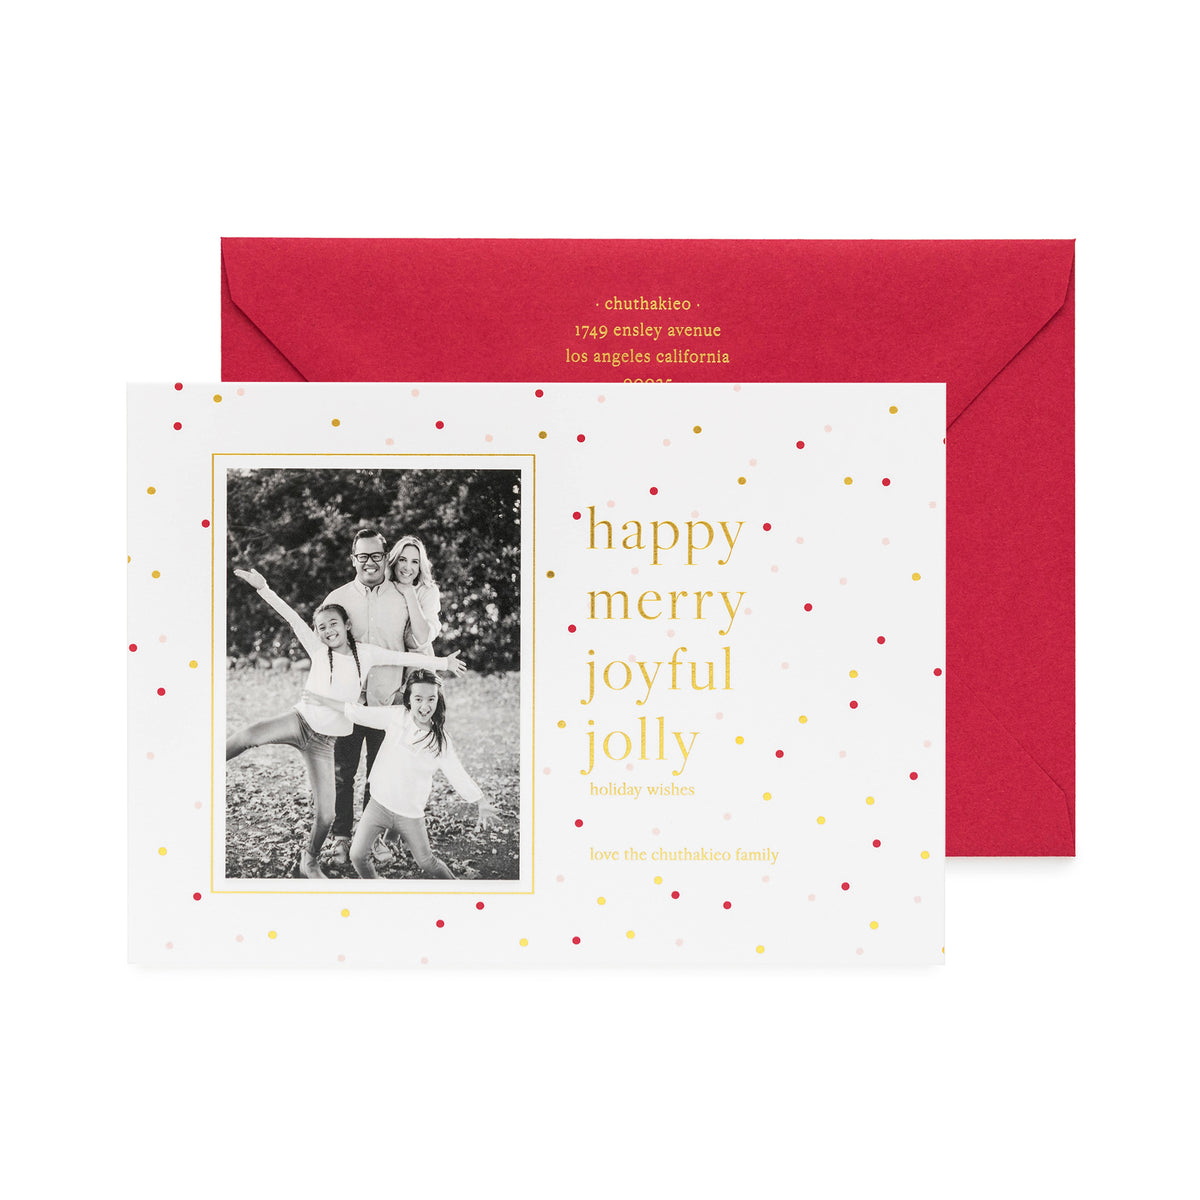 Red and gold dot holiday card with Happy Merry Joyful Jolly